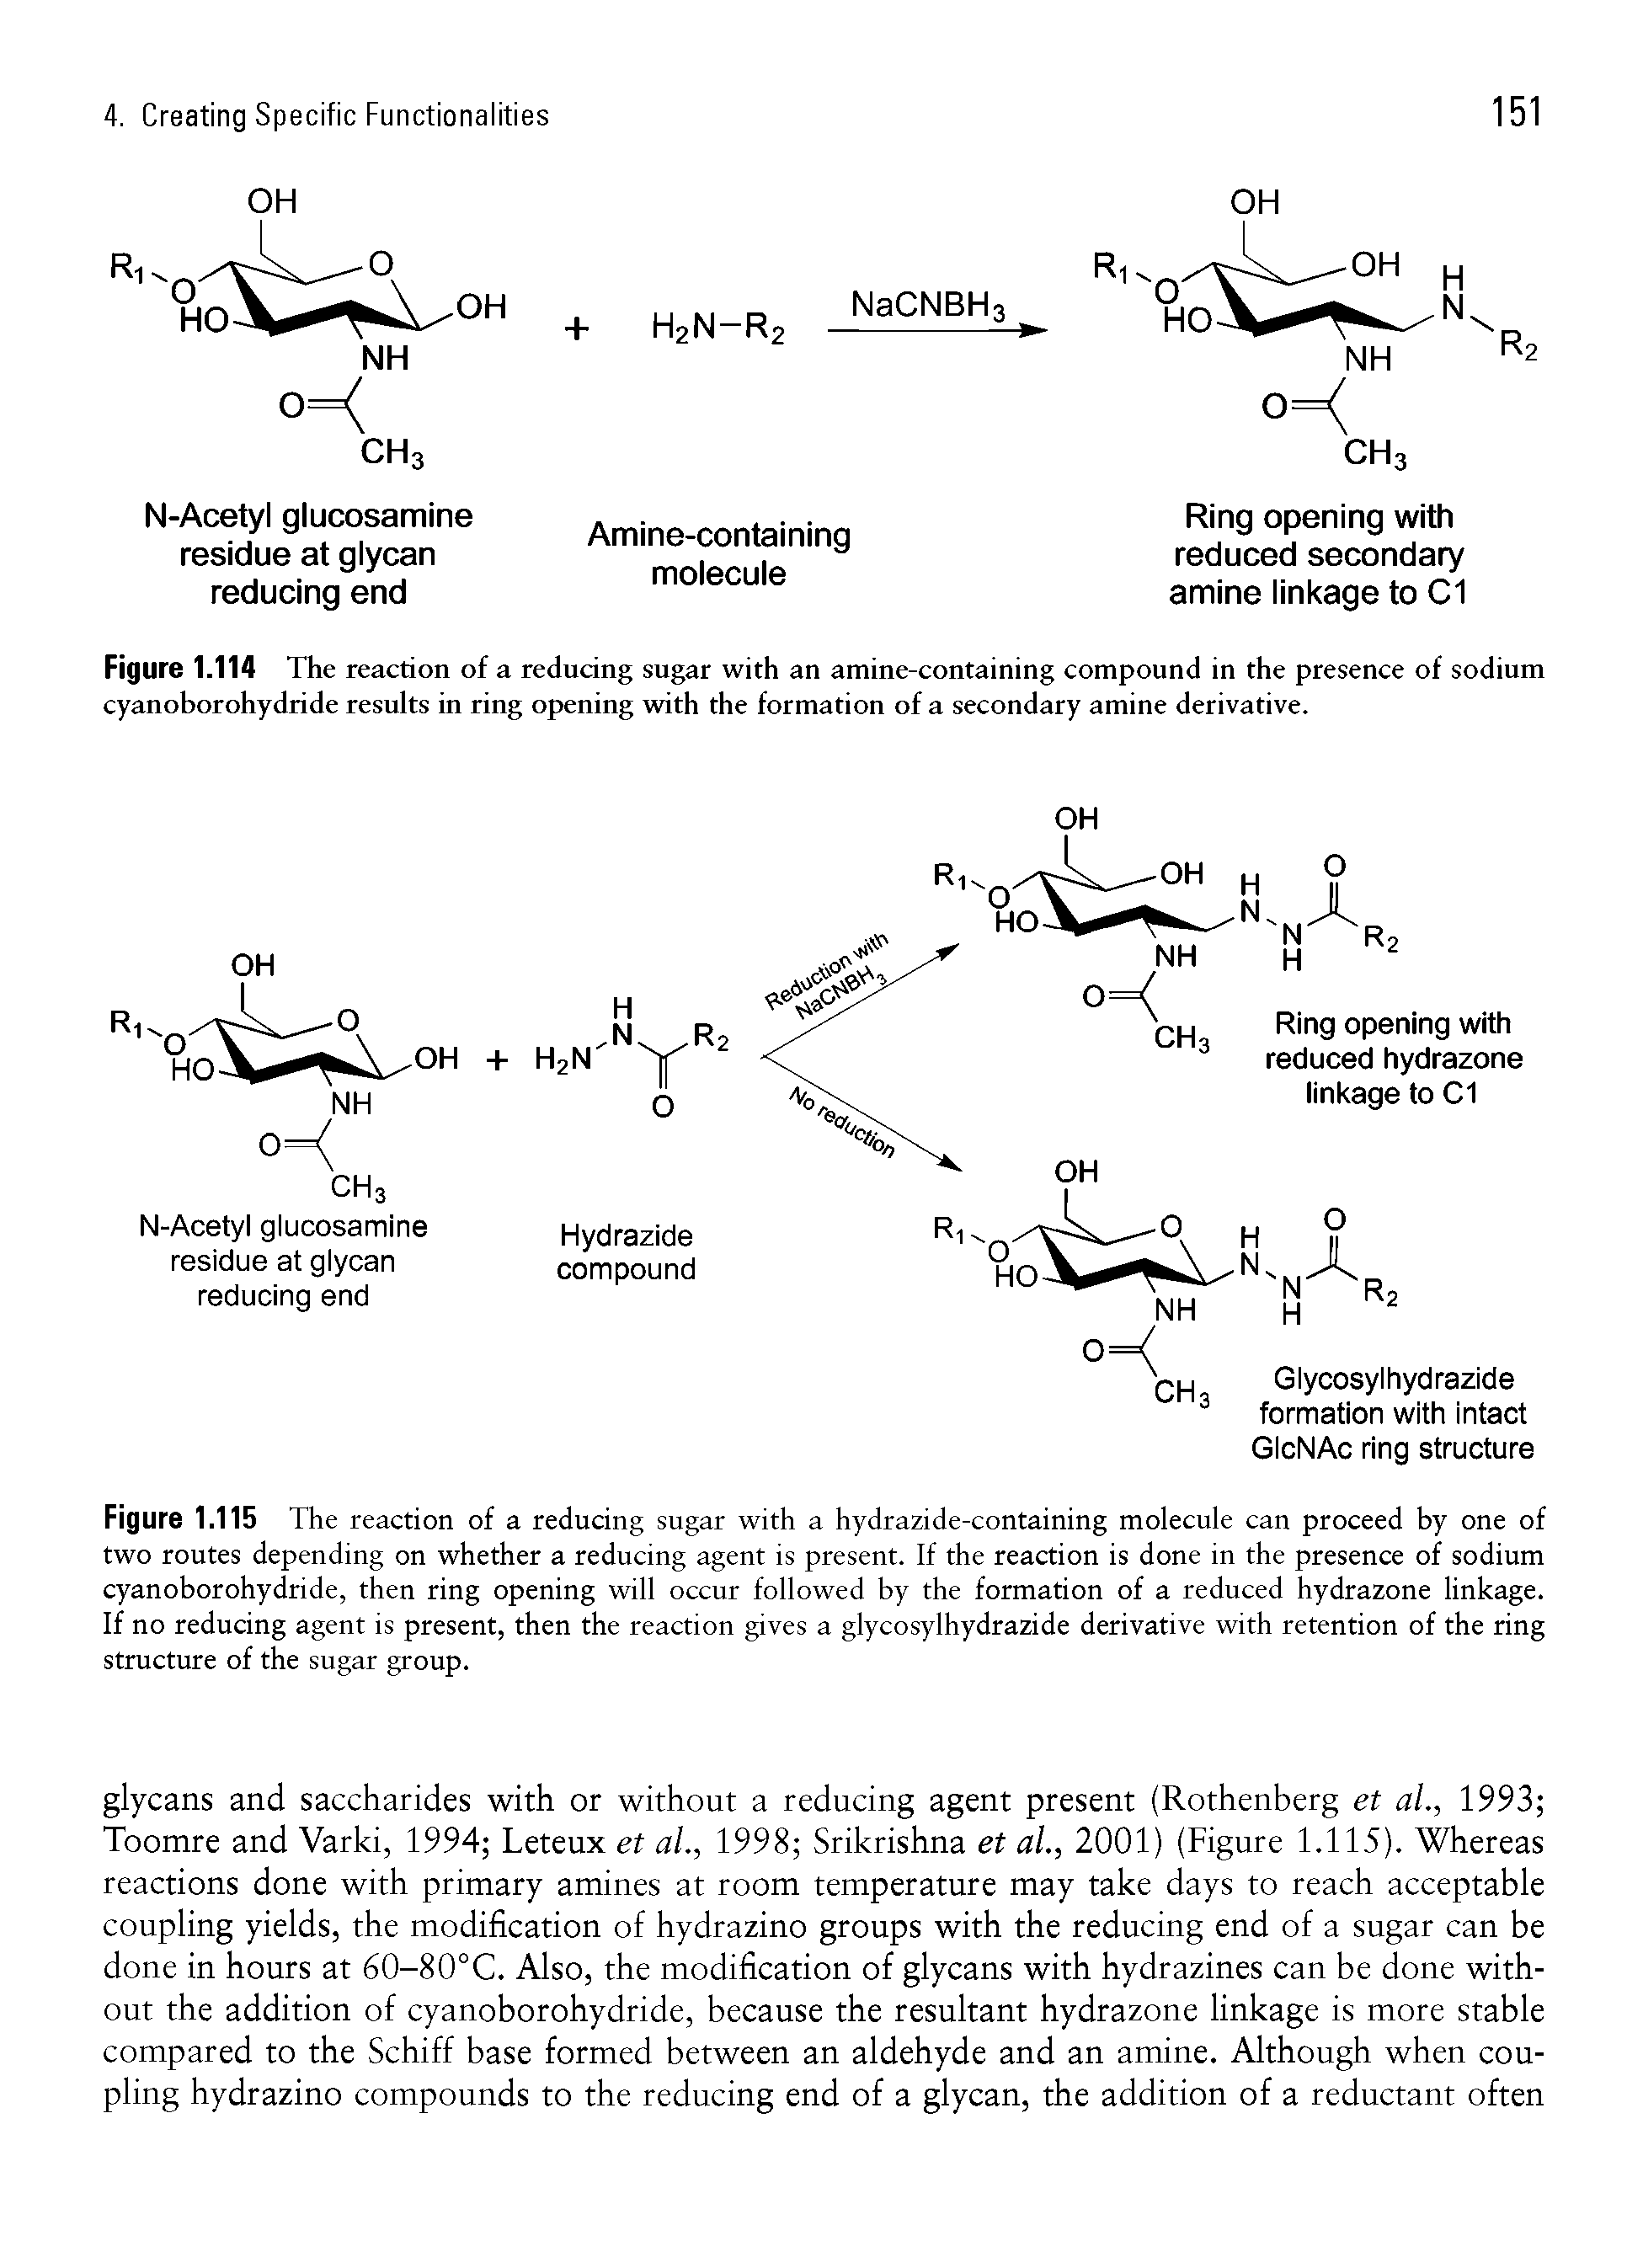 Figure 1.114 The reaction of a reducing sugar with an amine-containing compound in the presence of sodium cyanoborohydride results in ring opening with the formation of a secondary amine derivative.